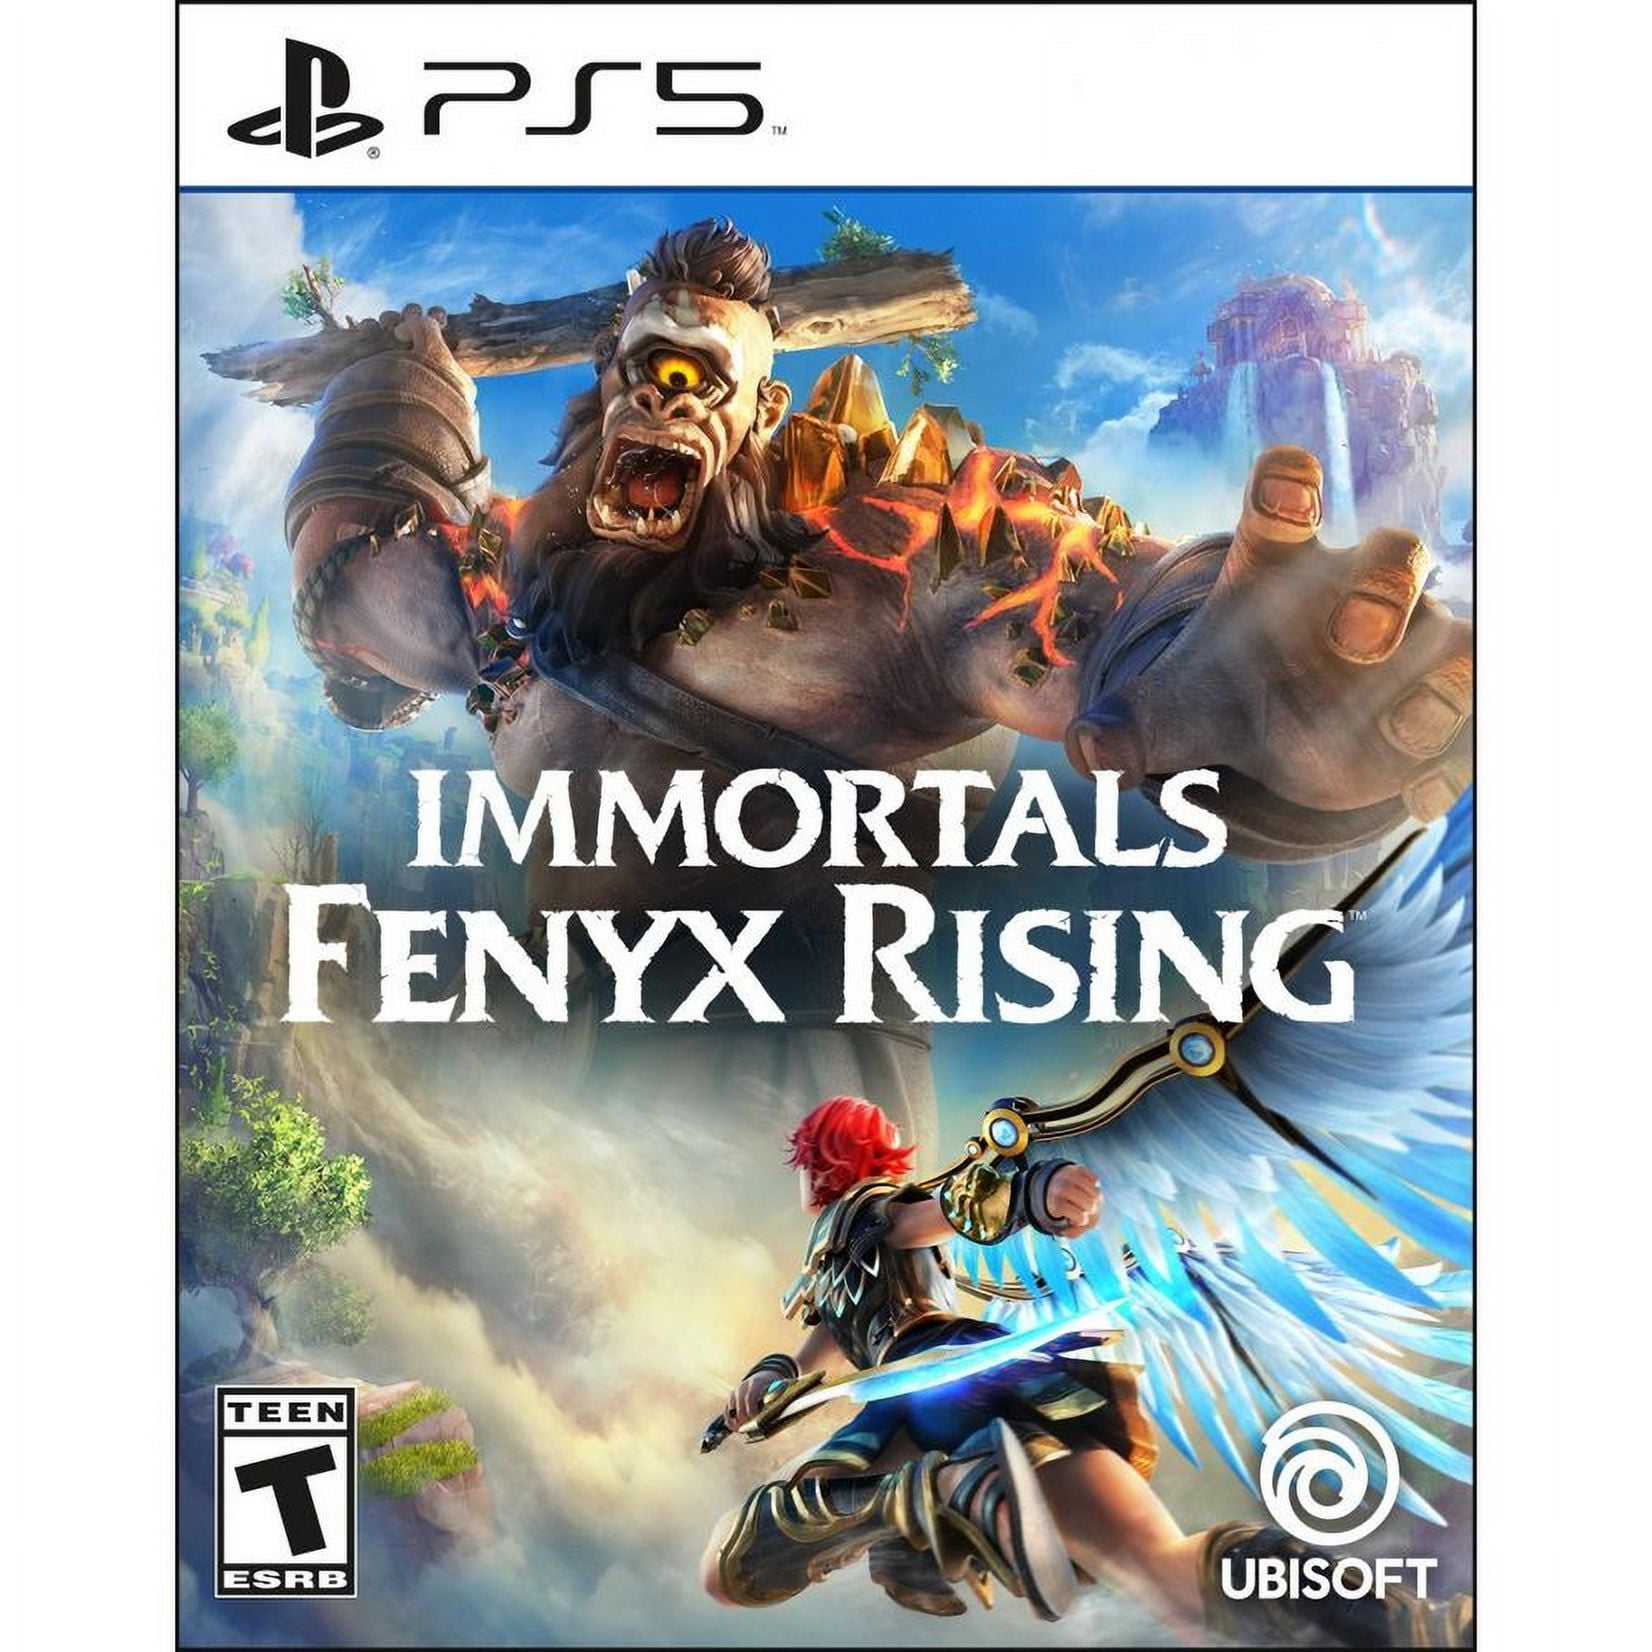 Immortals Fenyx Rising Exclusive Coverage - Game Informer